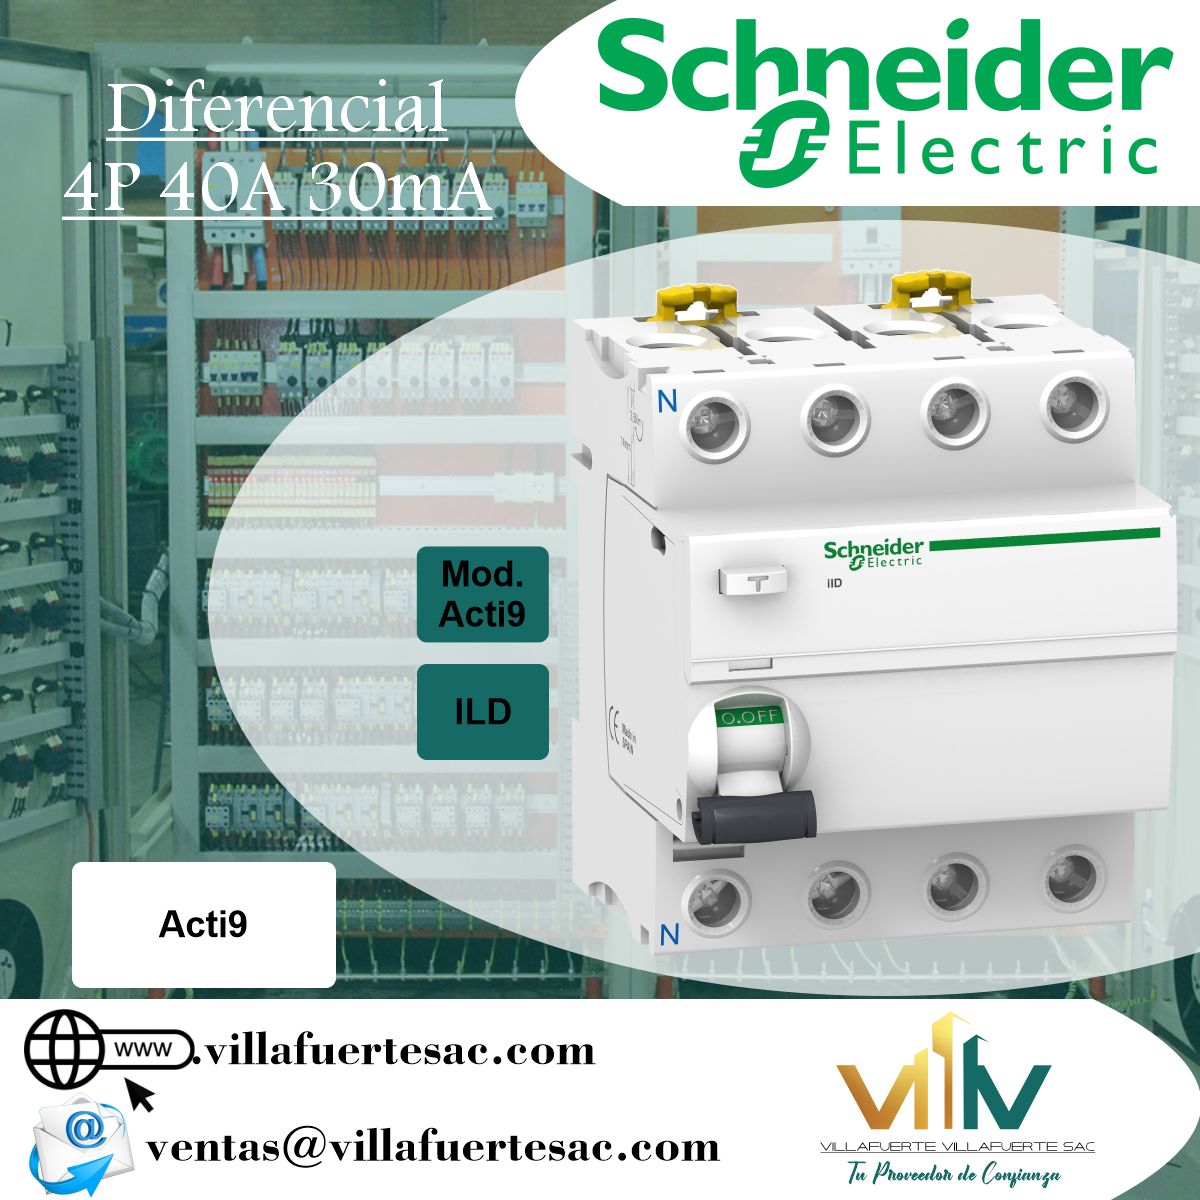 Diferencial 4P 40A 30mA